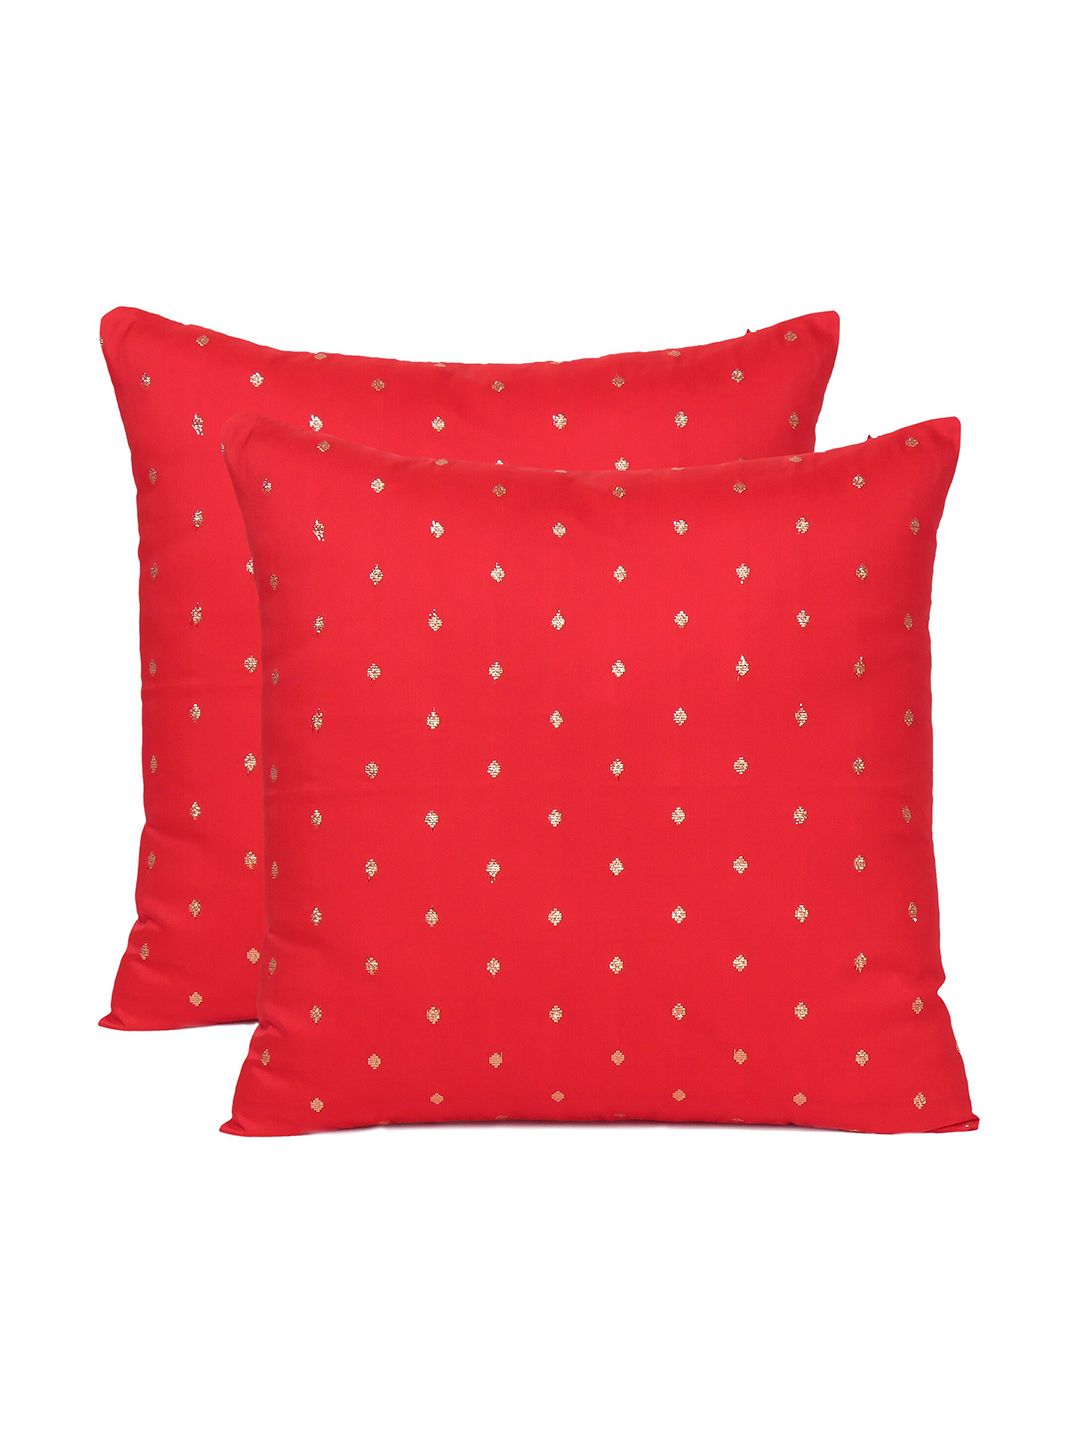 OUSSUM Red & Gold-Toned Set of 2 Abstract Square Cushion Covers Price in India